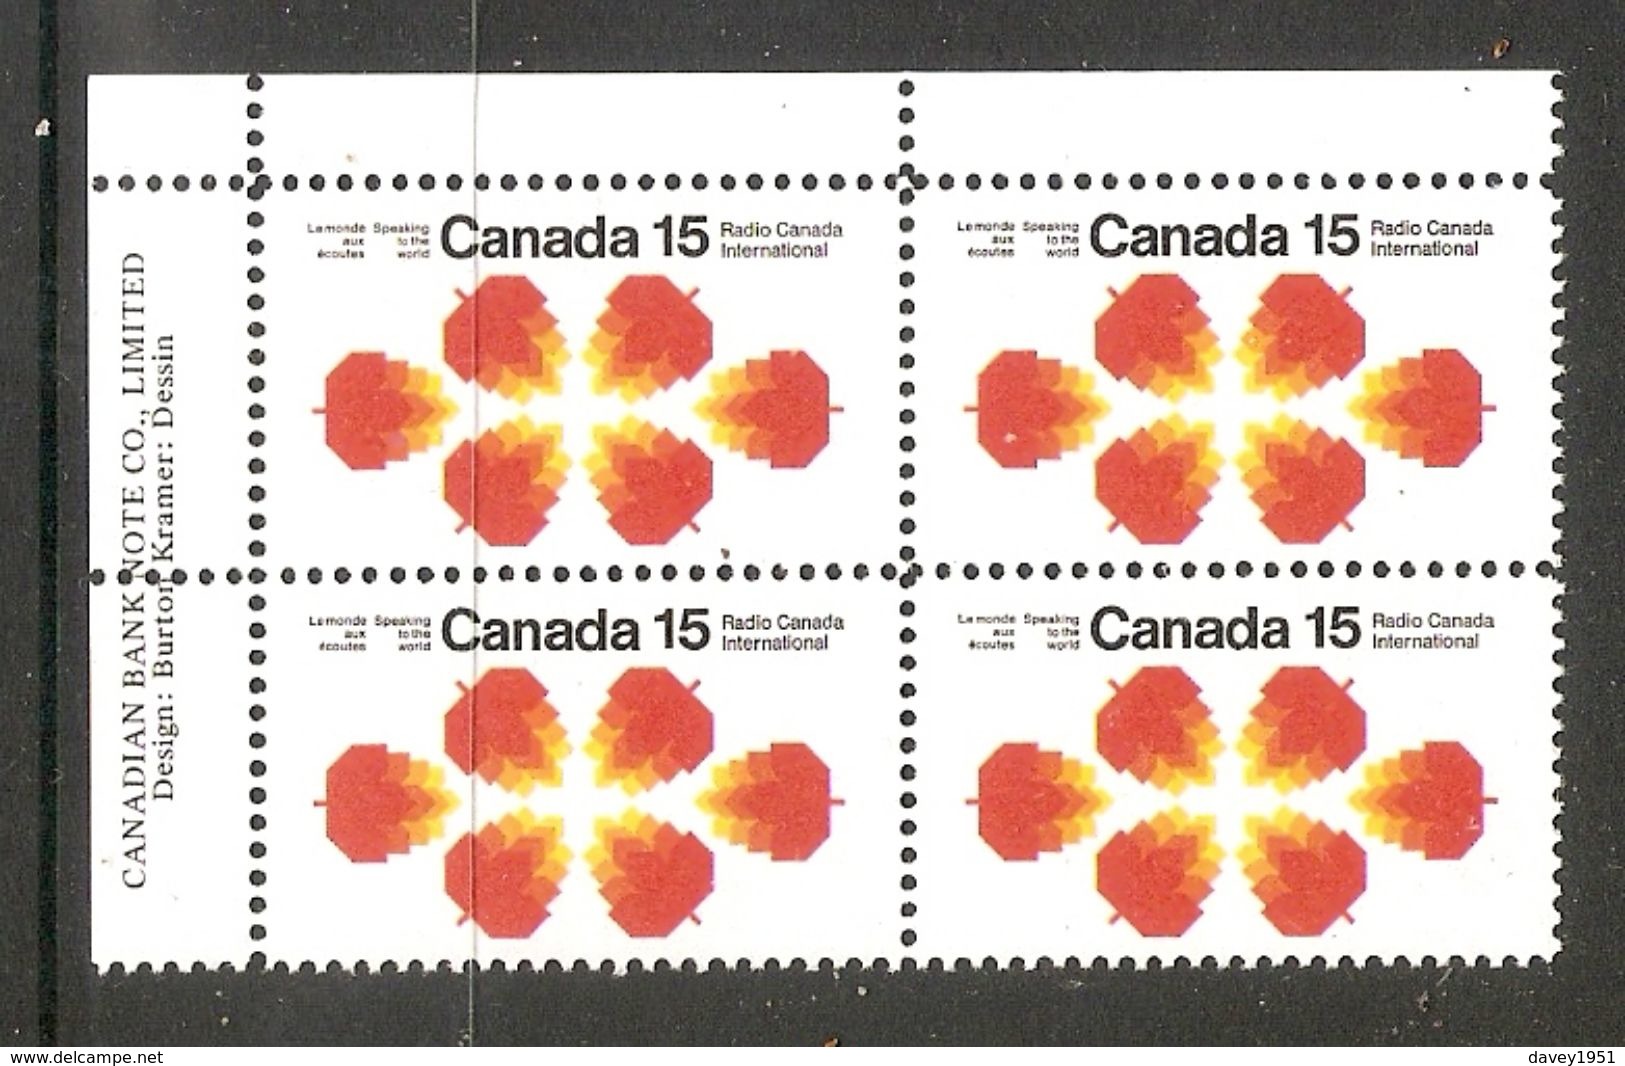 006309 Canada 1971 Radio 15c Plate Block UL MNH - Num. Planches & Inscriptions Marge